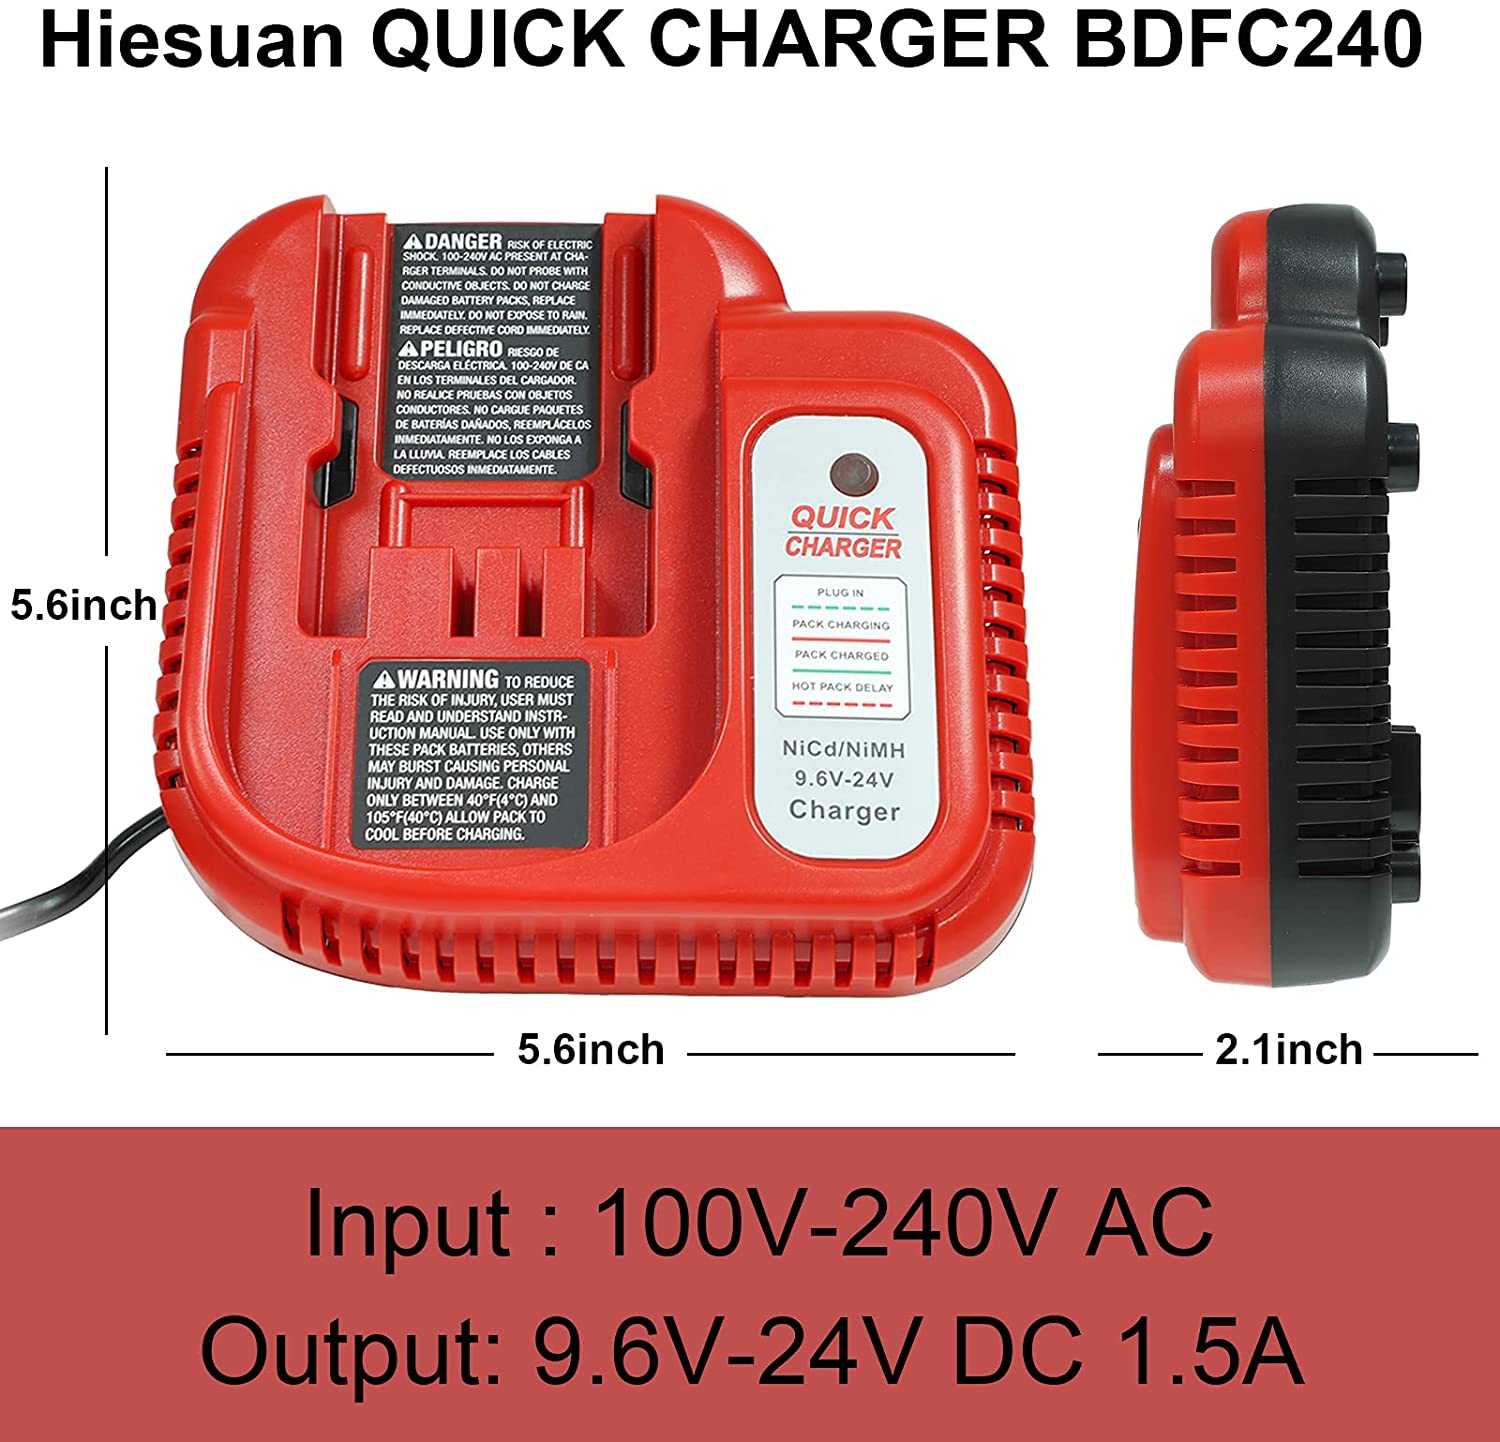 1.5A Rapid Charger for Black &Decker 18 Volt HPB18 HPB18-OPE Ni-Cd